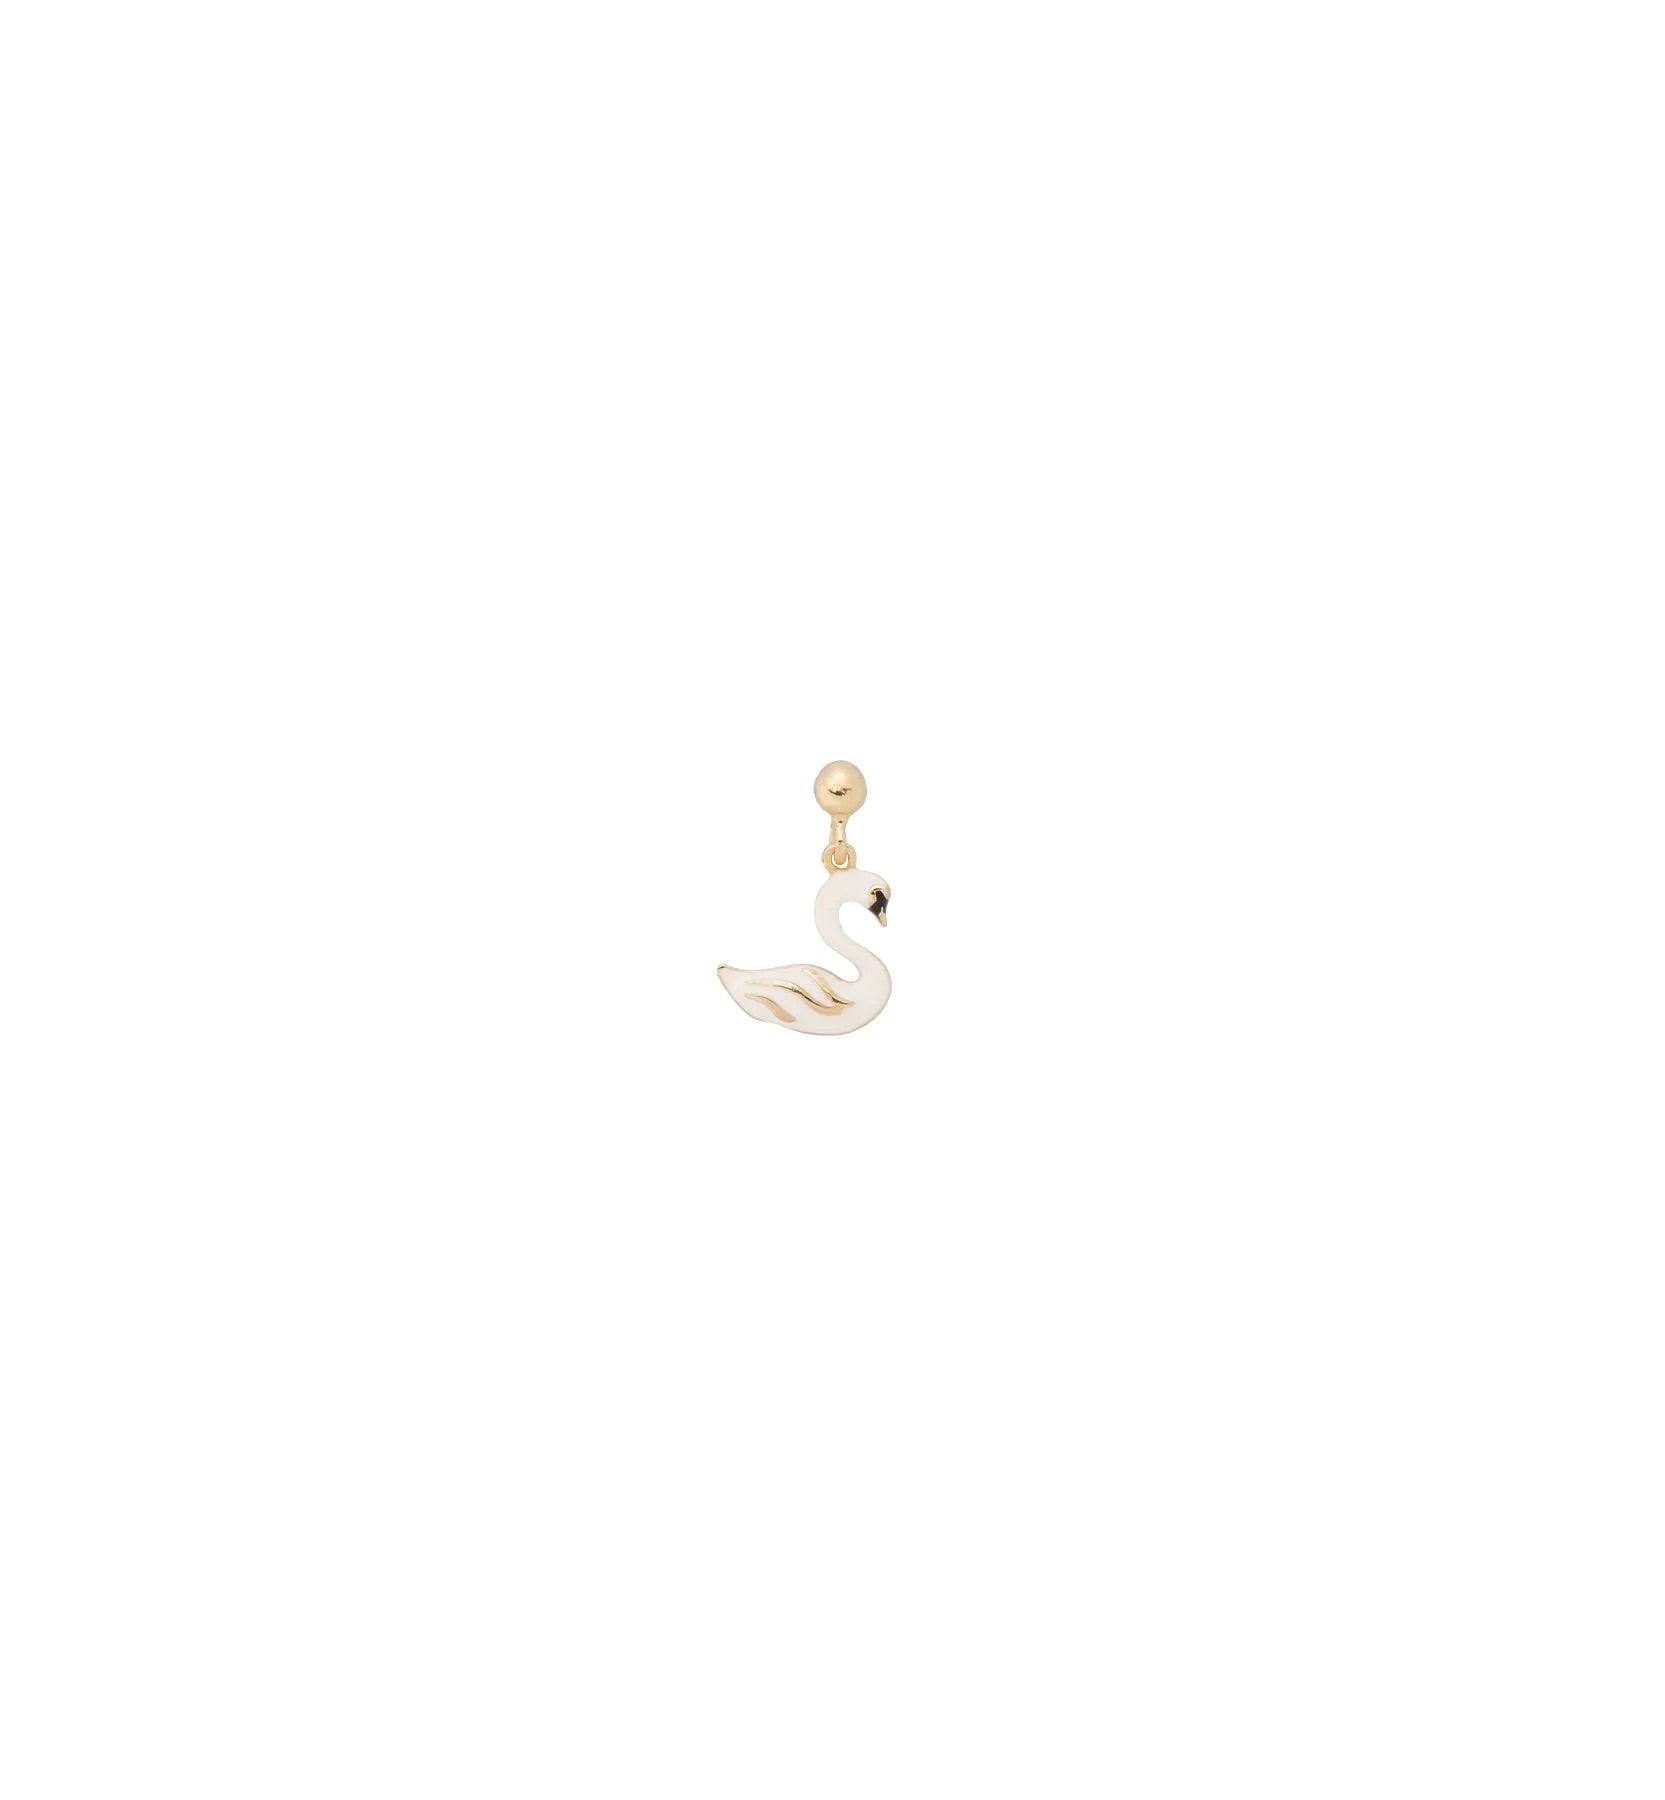 Single Swan Lake Stud Earring Goldplated - Babs The Label